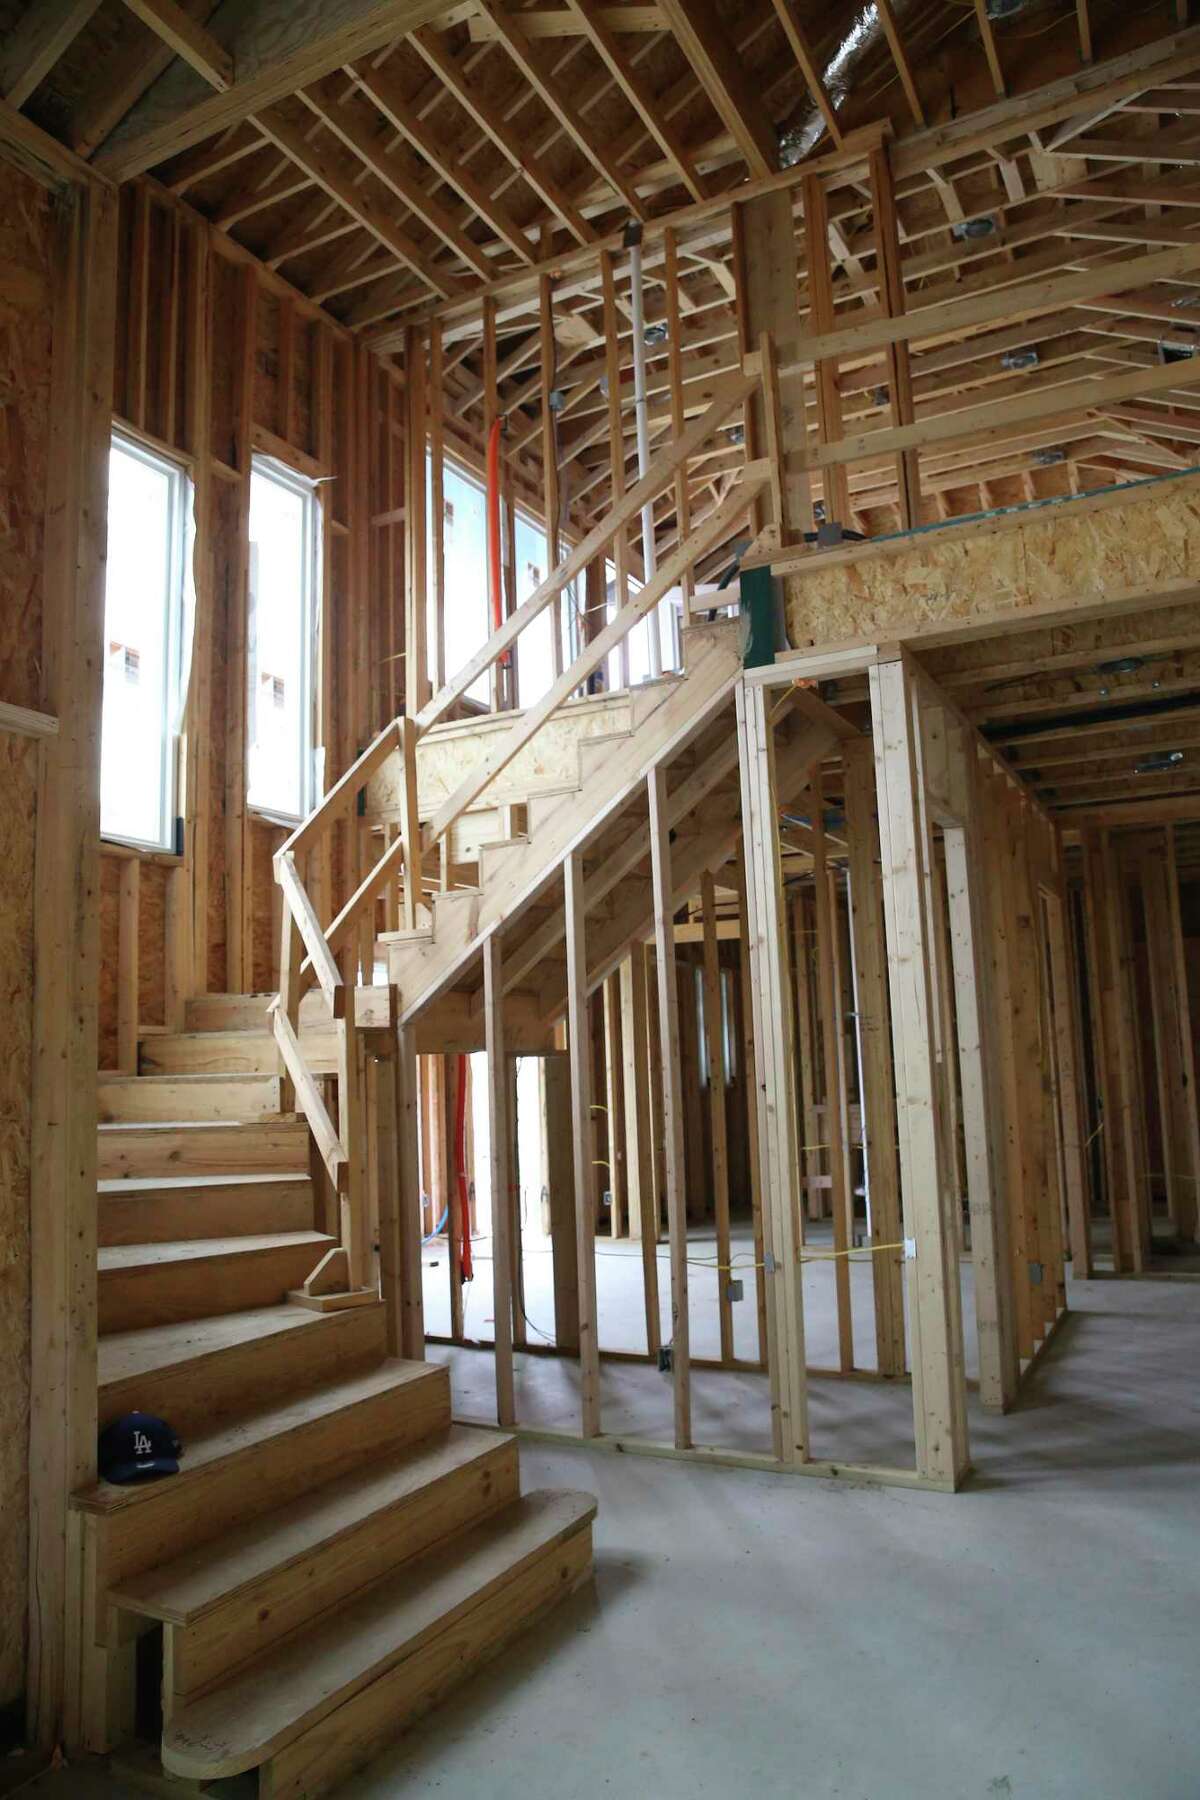 Price increases and delivery delays mean that the budget for Gina and Robert Martinezes' $698,000 home would be 20 percent higher if construction were starting now instead of last year.Since April 2020, the price of 1,000 board feet of lumber has jumped more than 500 percent.